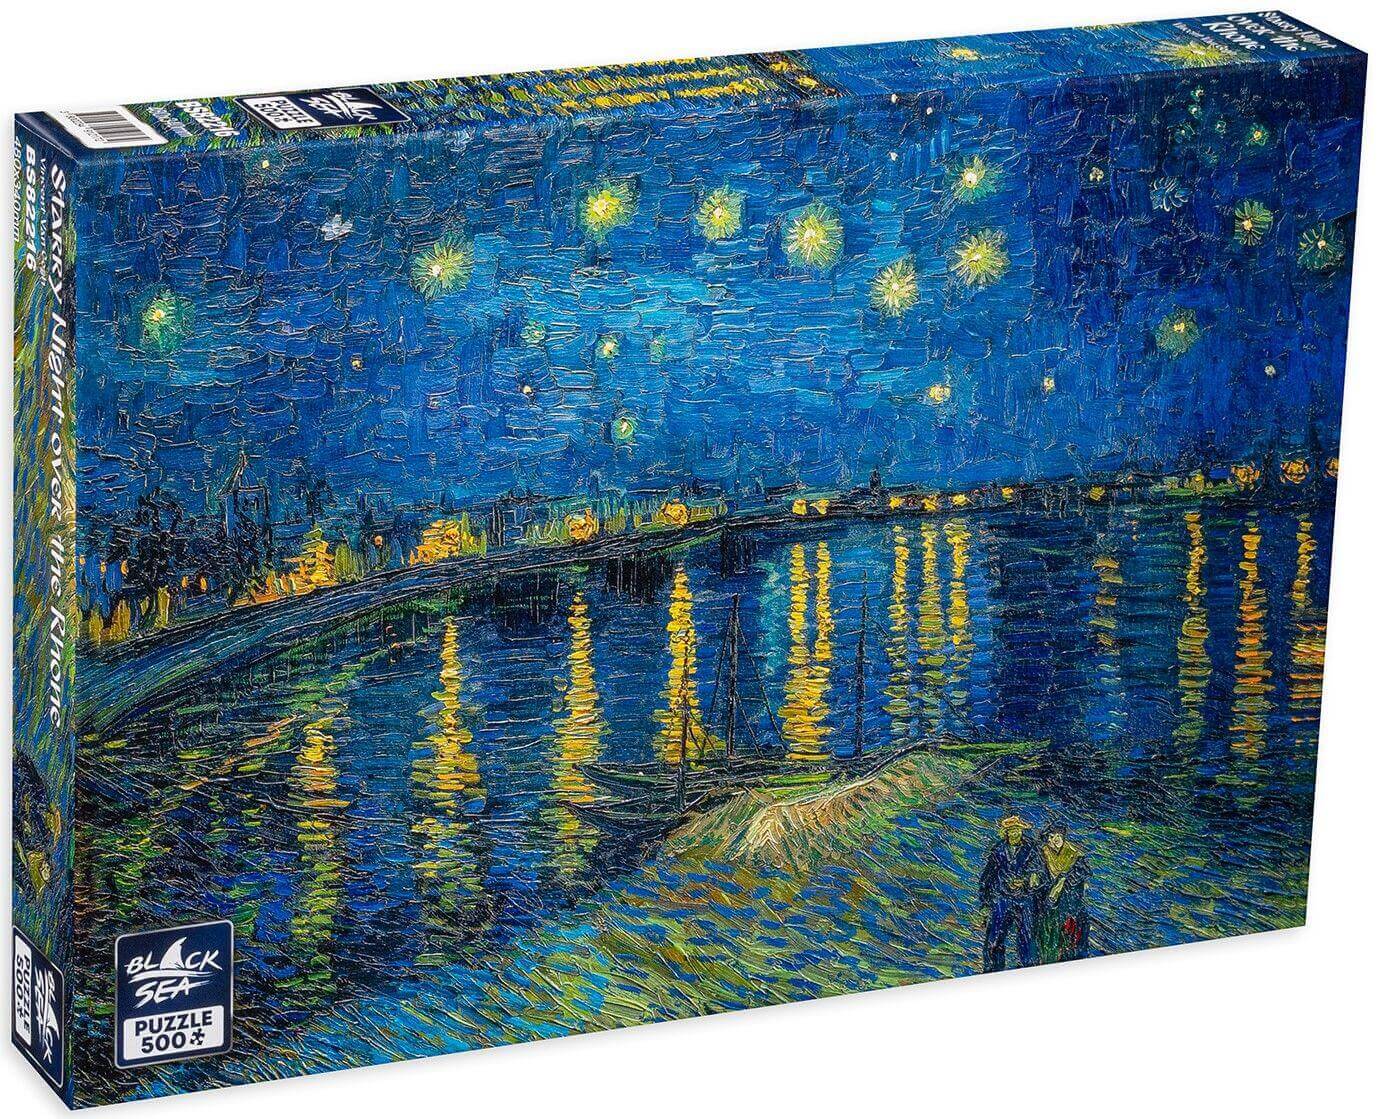 Puzzle Black Sea 500 pieces - Starry Night over the Rhone